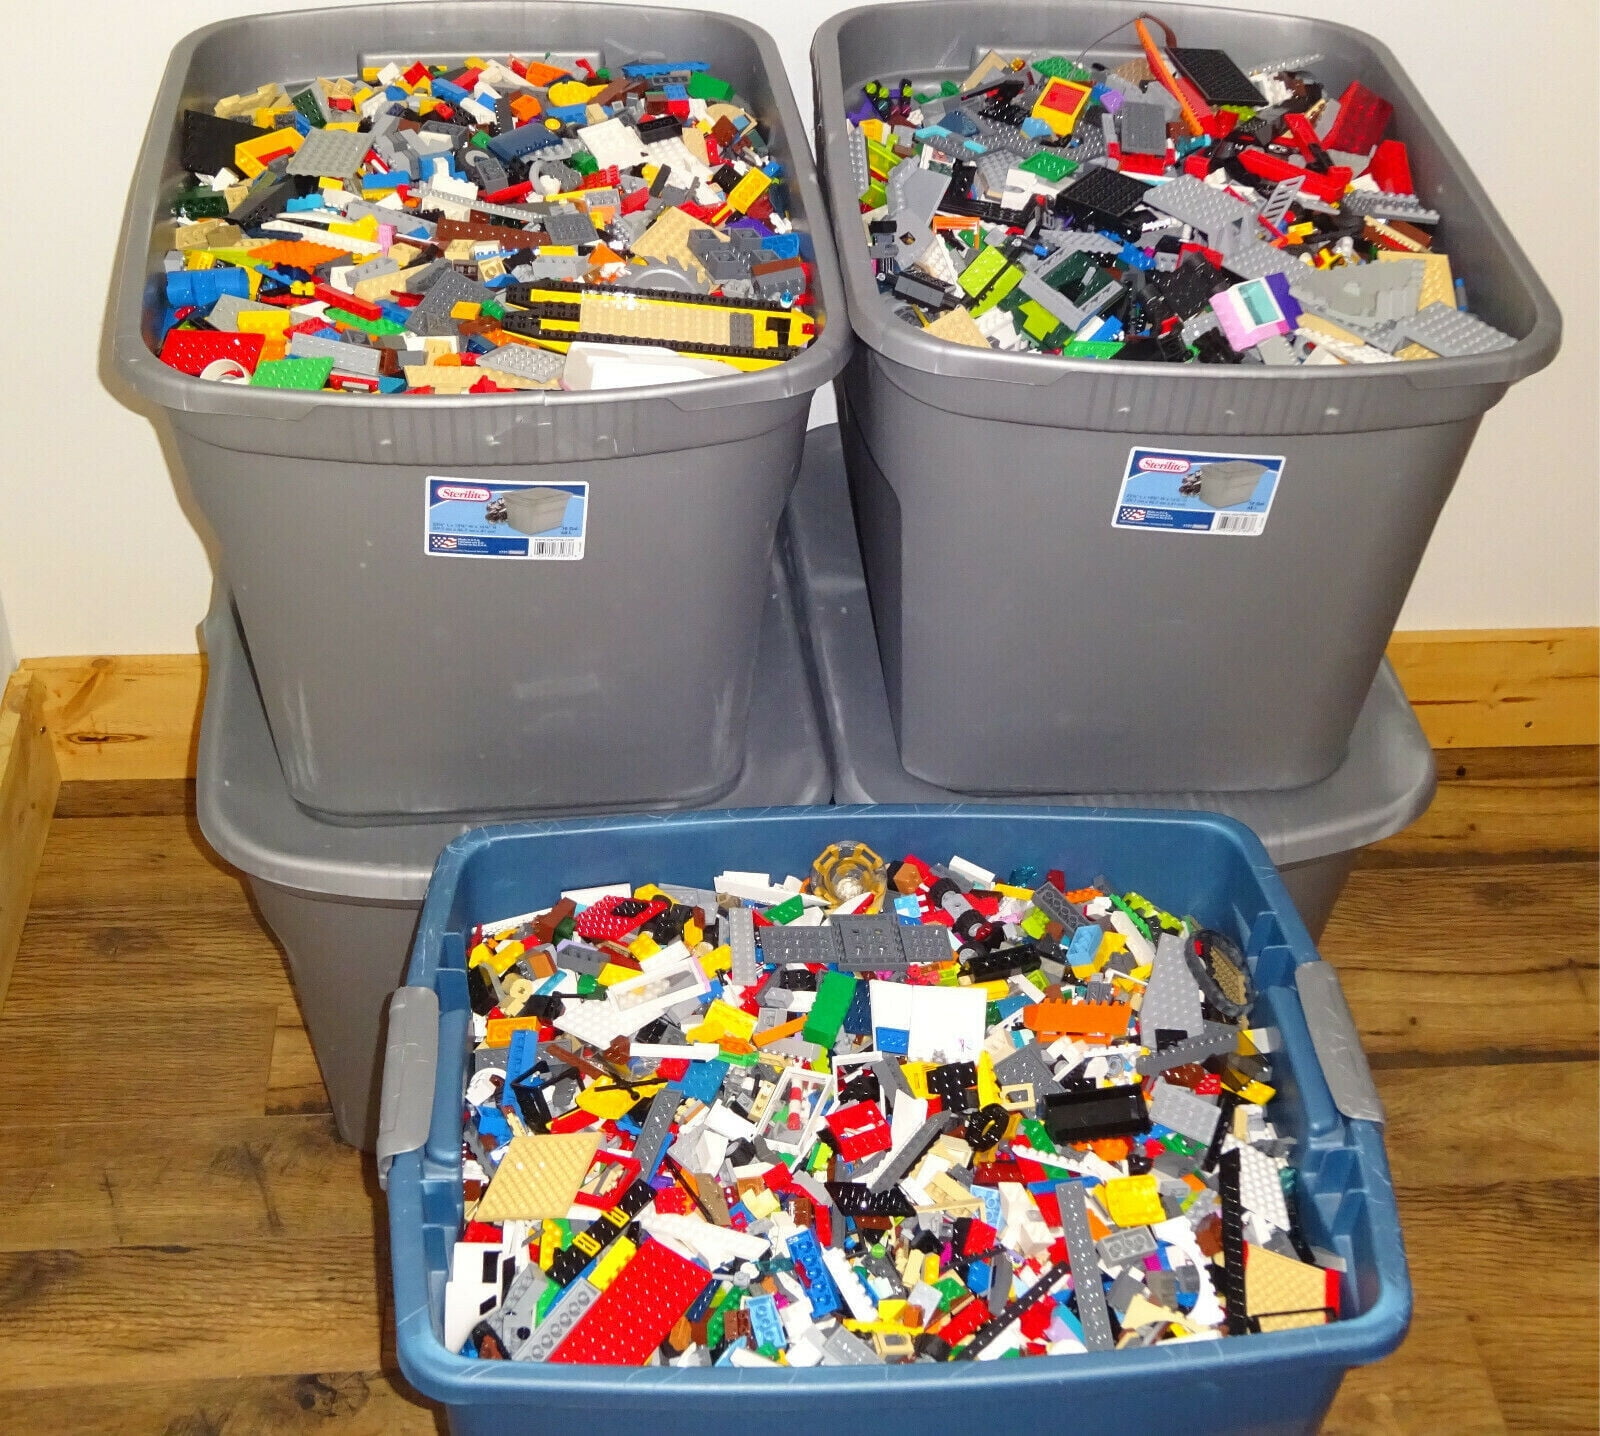 LEGO Lot 6 Pounds of random parts and Pieces☀️☀️from sets like Wars, ninjago & More☀️☀️ AUTHENTIC LEGO - Walmart.com